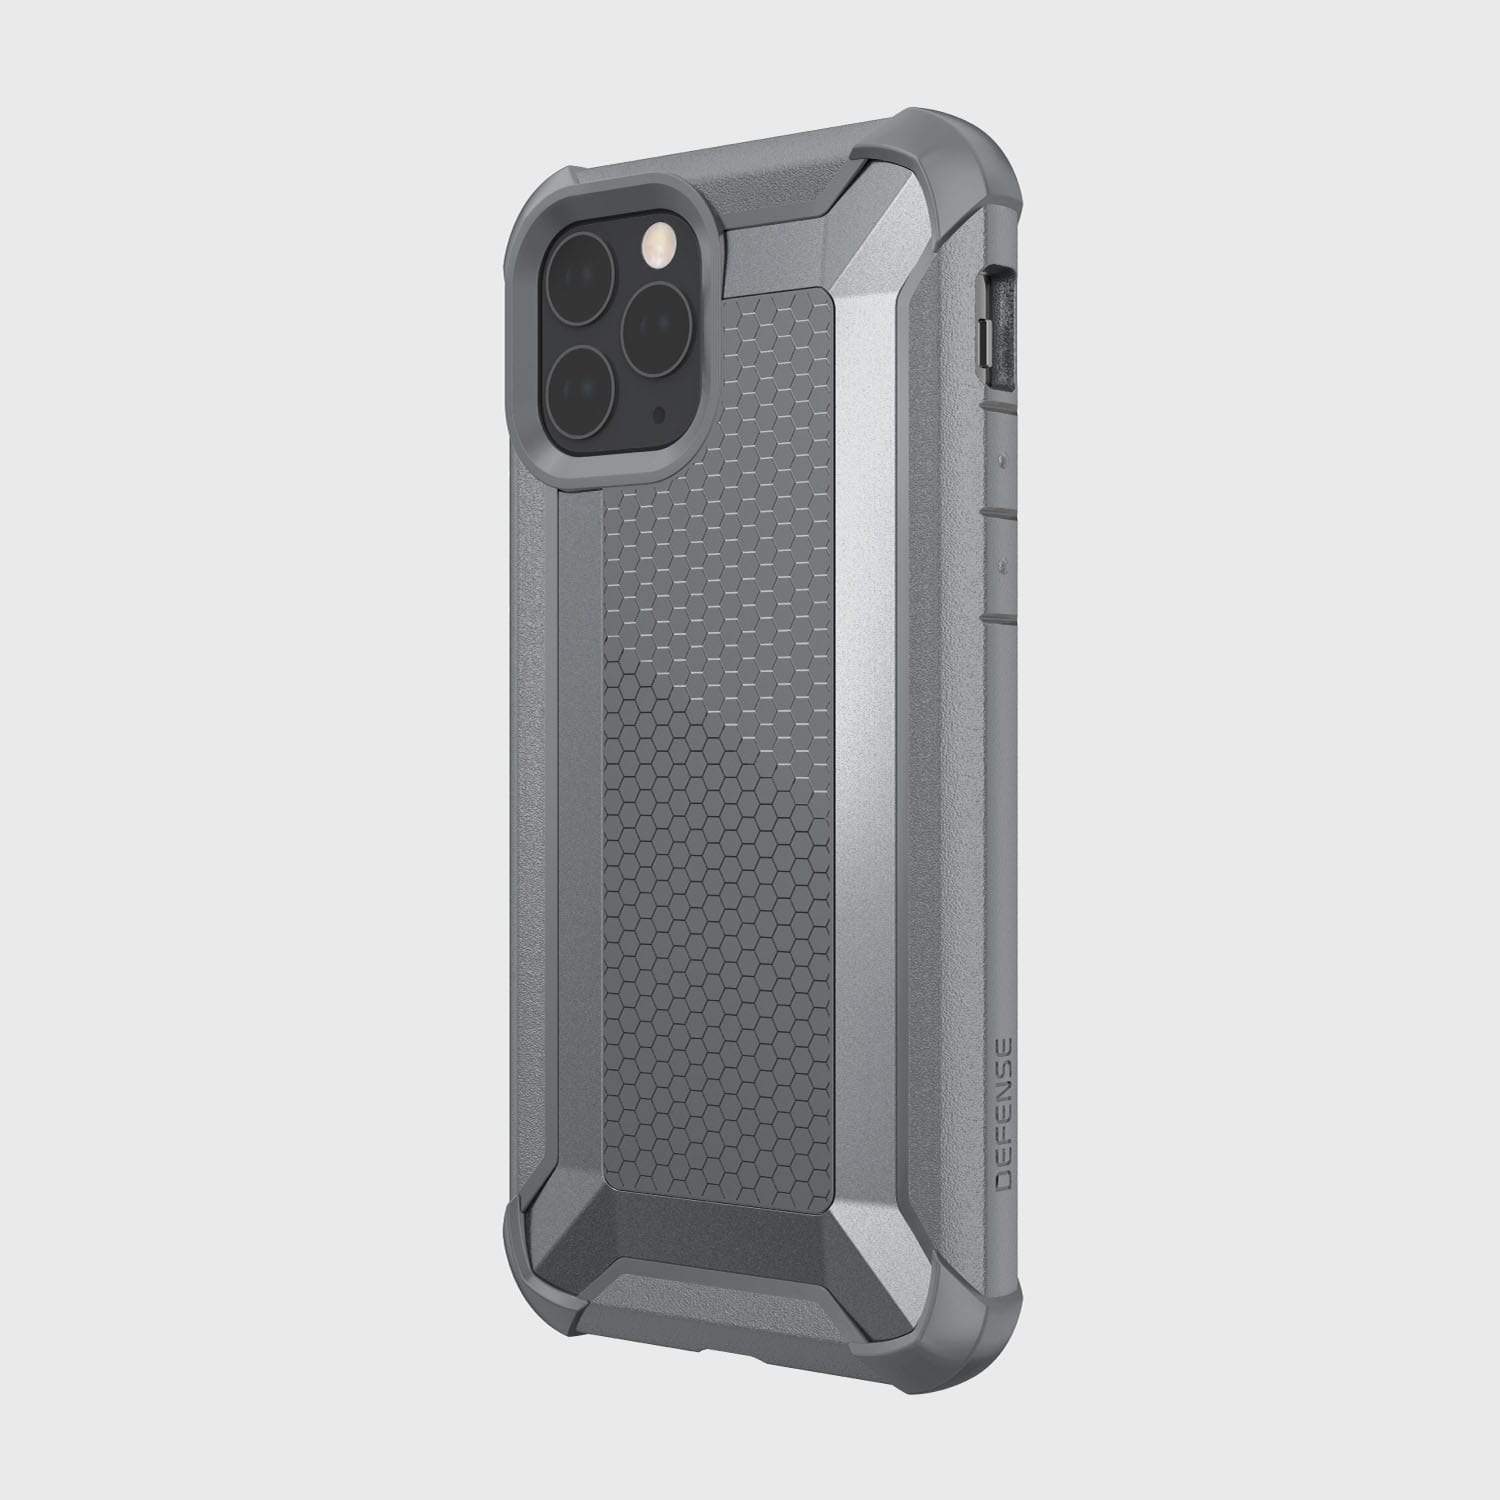 The back view of the shock-absorbing Raptic iPhone 11 Pro Case - TACTICAL.